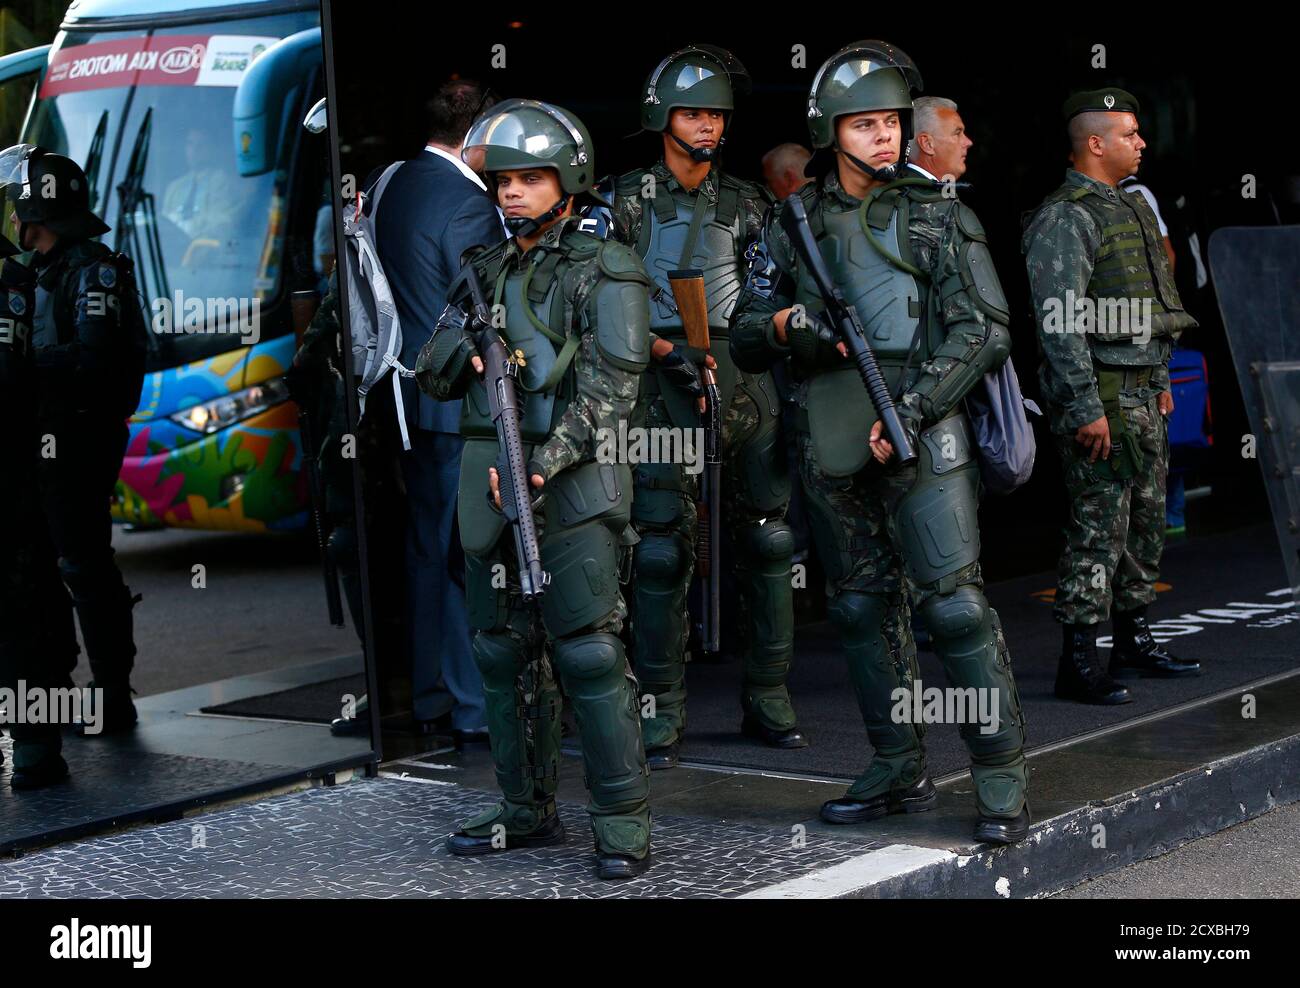 Brazilian army personal stand guard as the England team arrives at their team hotel in Rio de Janeiro June 8, 2014. REUTERS/Eddie Keogh (BRAZIL - Tags: SPORT SOCCER WORLD CUP) Stock Photo